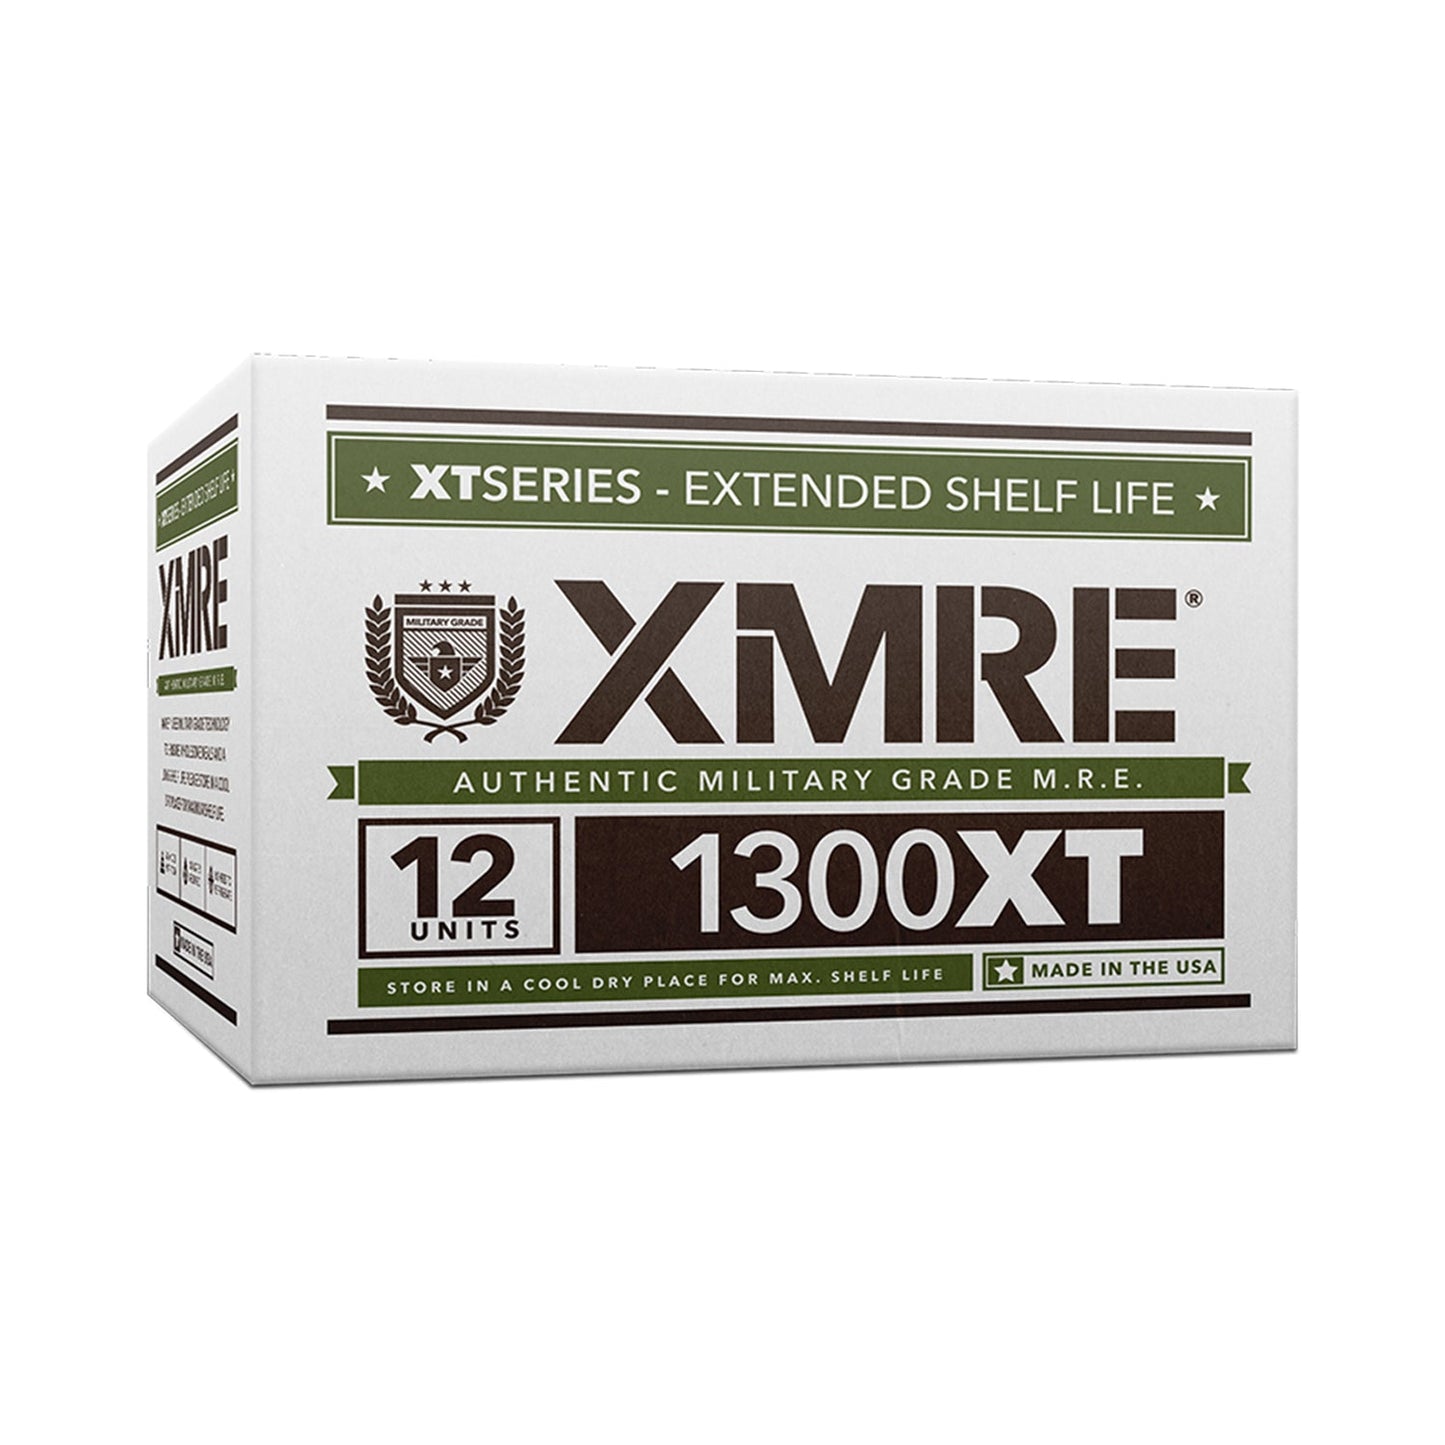 xmre meals 1300xt - 12 case with heaters (meal ready to eat - military grade)